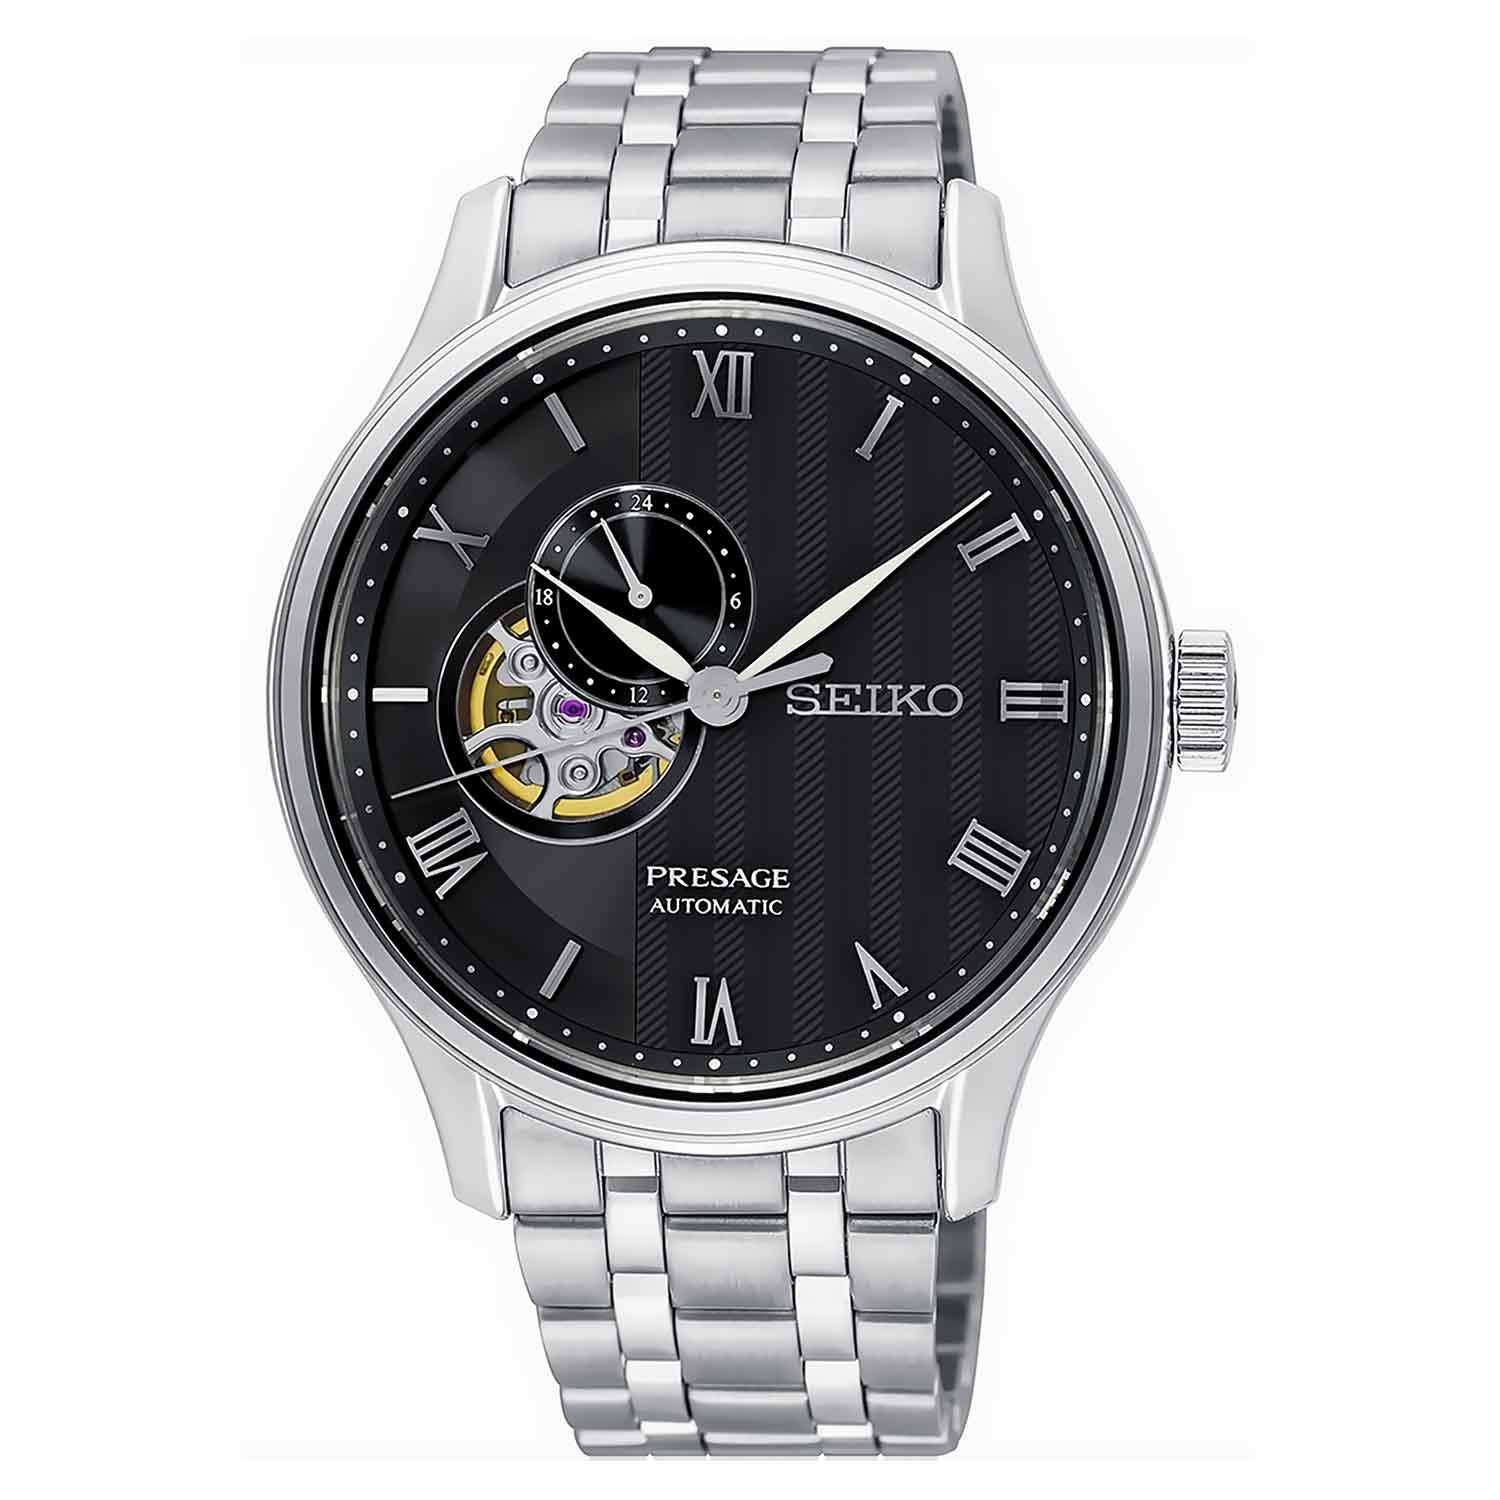 SSA377J1 SEIKO Presage Automatic Watch. Seiko’s stylish Presage Automatic Model SSA377J1 ( also abbreviated to SSA377 0r SSA377J ). This model features the ever-reliable 4R39 Automatic Movement with 24 Jewels. A good looking gents watch, that can also be 